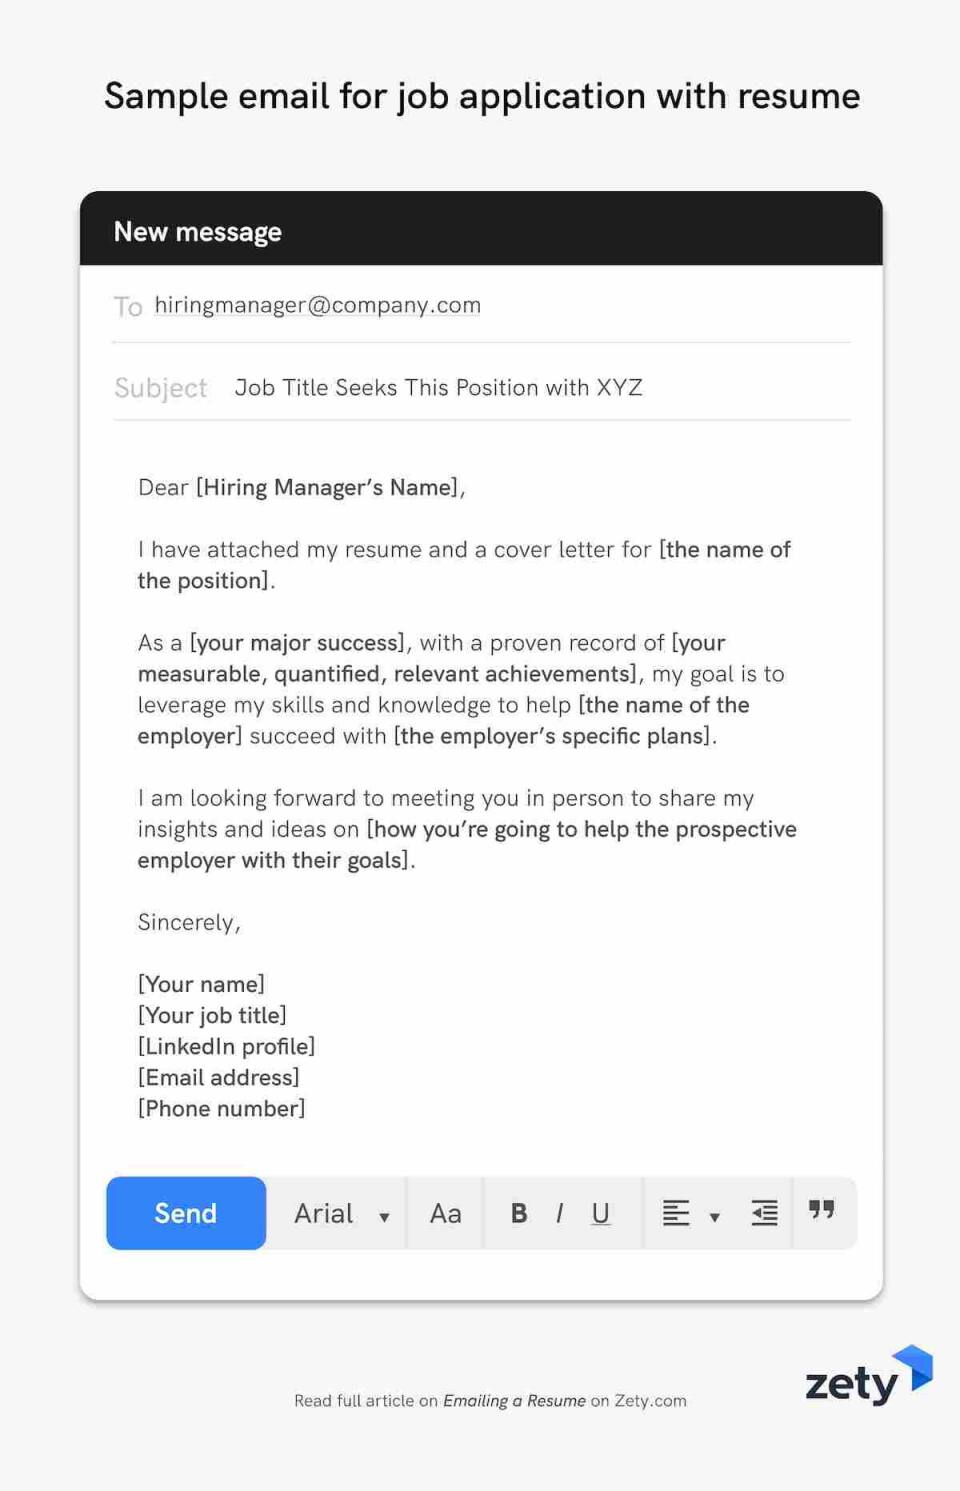 Sample email for job application with resume